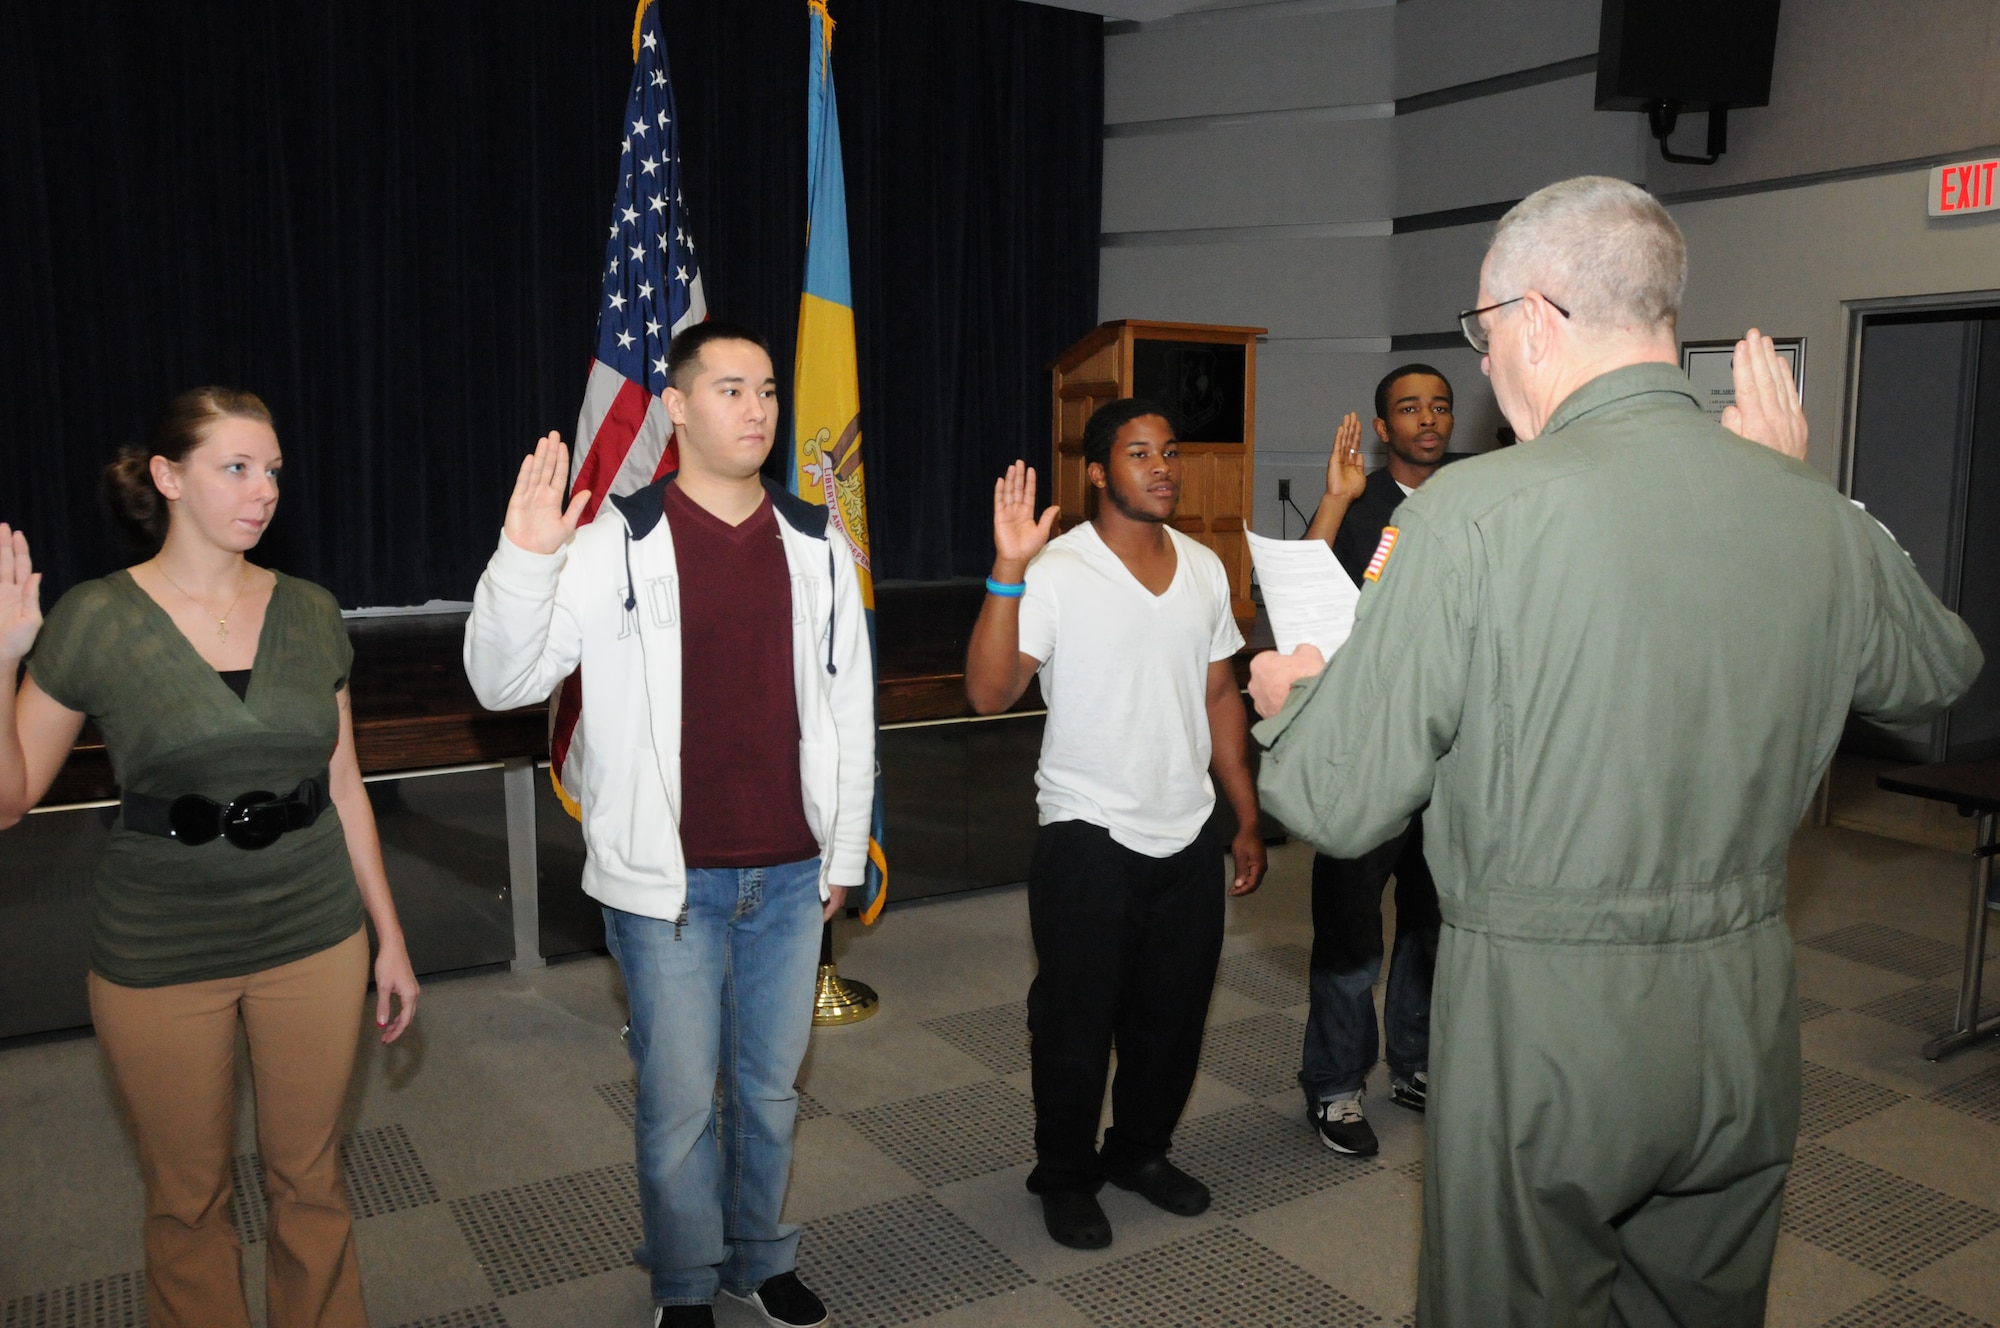 Four new recruits are sworn into the Delaware Air National Guard on Sept. 30, 2011 by 166th Airlift Wing Commander Col. Jonathan Groff inside the unit headquarters in New Castle, Del. Left to Right: Melinda Watson of Newark, Del., John Mason of Pemberton, N.J. (entering vehicle maintenance career field), Wayne Kersey of Dover, Del. (entering the medical field), and Derrick Durroh of Wilm., Del. (entering the aerospace ground equipment career field in maintenance). Each new enlistee will complete Air Force Basic Training in San Antonio, Texas, to be followed by attendance at an Air Force technical school to gain specific career field skills. Wayne Kersey of Dover, Del. is the 400th career recruit enlisted by recruiting supervisor Master Sgt. Gerald Miller, making Sgt. Miller one of the top recruiters in the 65-year history of the unit. The Delaware ANG has 1,100 positions, and is currently hiring for over 15 career fields with several dozen openings within those fields. For information on part-time Air Guard service or available careers, go to www.166aw.ang.af.mil, or www.facebook.com/166thAirliftWing, or call the Delaware ANG recruiting office at 800-742-6713, or 302-323-3444. (U.S. Air Force photo/Tech. Sgt. Harold Herglotz)